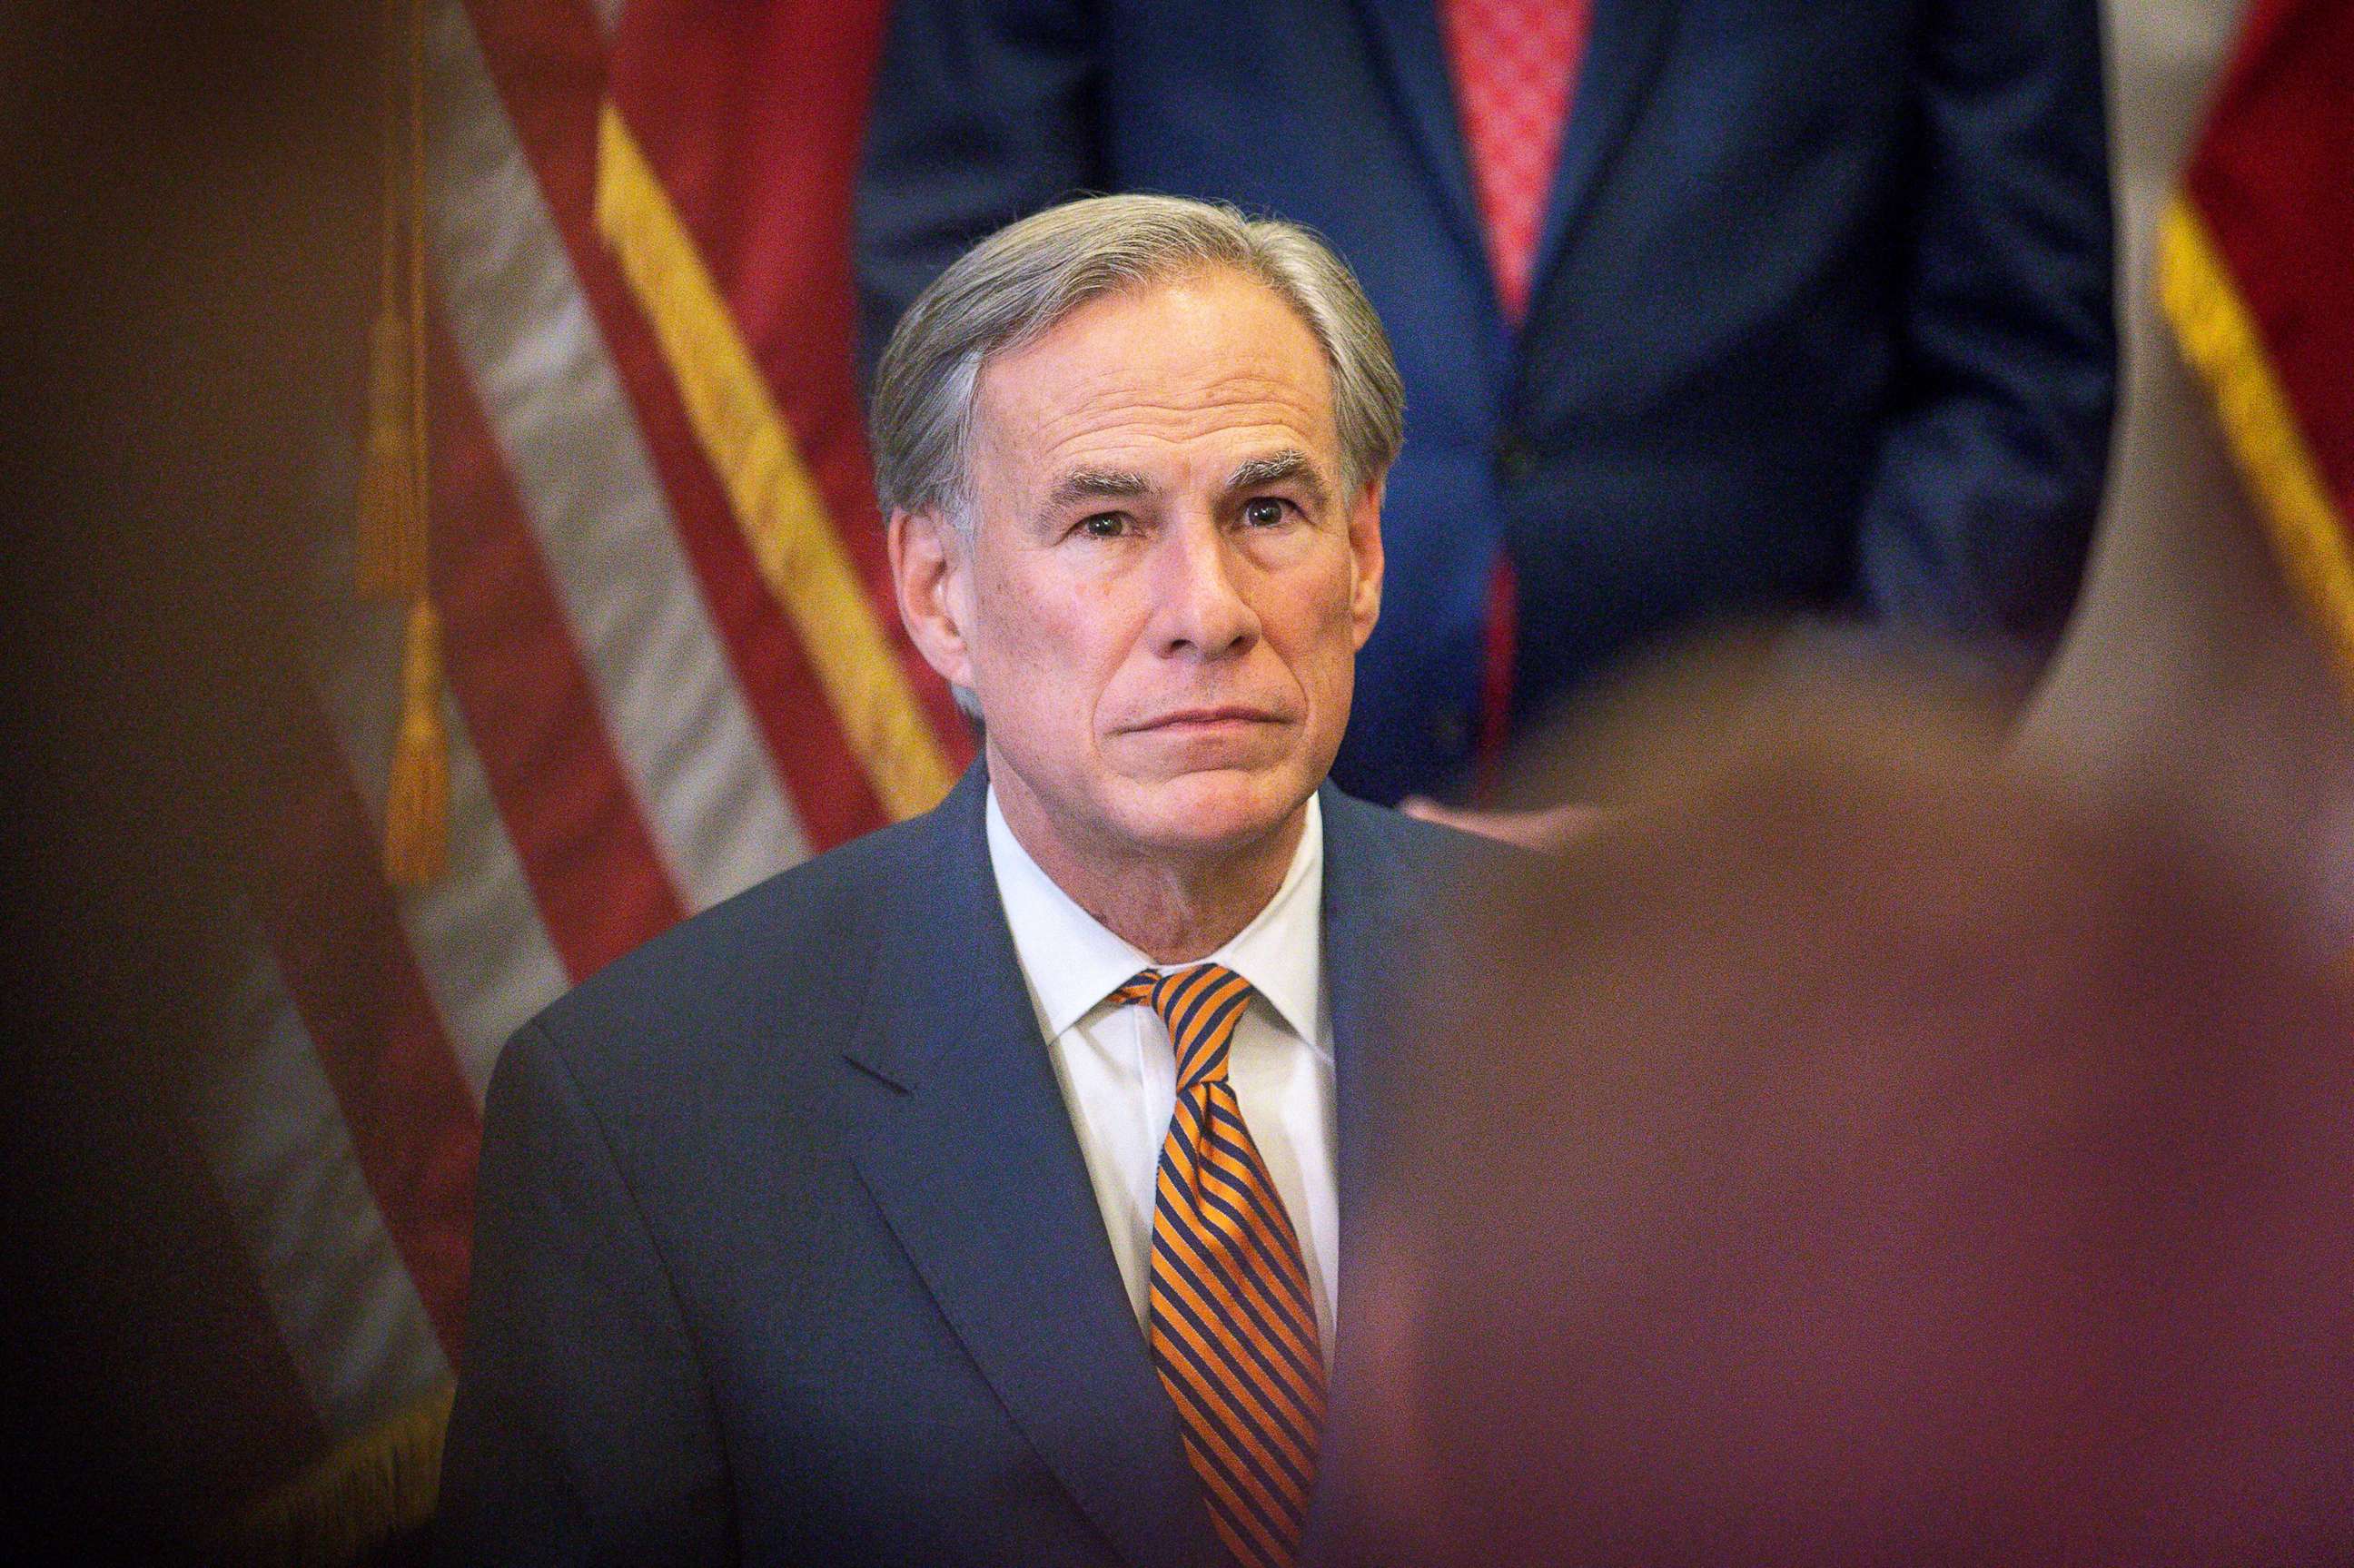 PHOTO: Texas Governor Greg Abbott attends a press conference where he signed Senate Bills 2 and 3 at the Capitol, June 8, 2021, in Austin, Texas. 